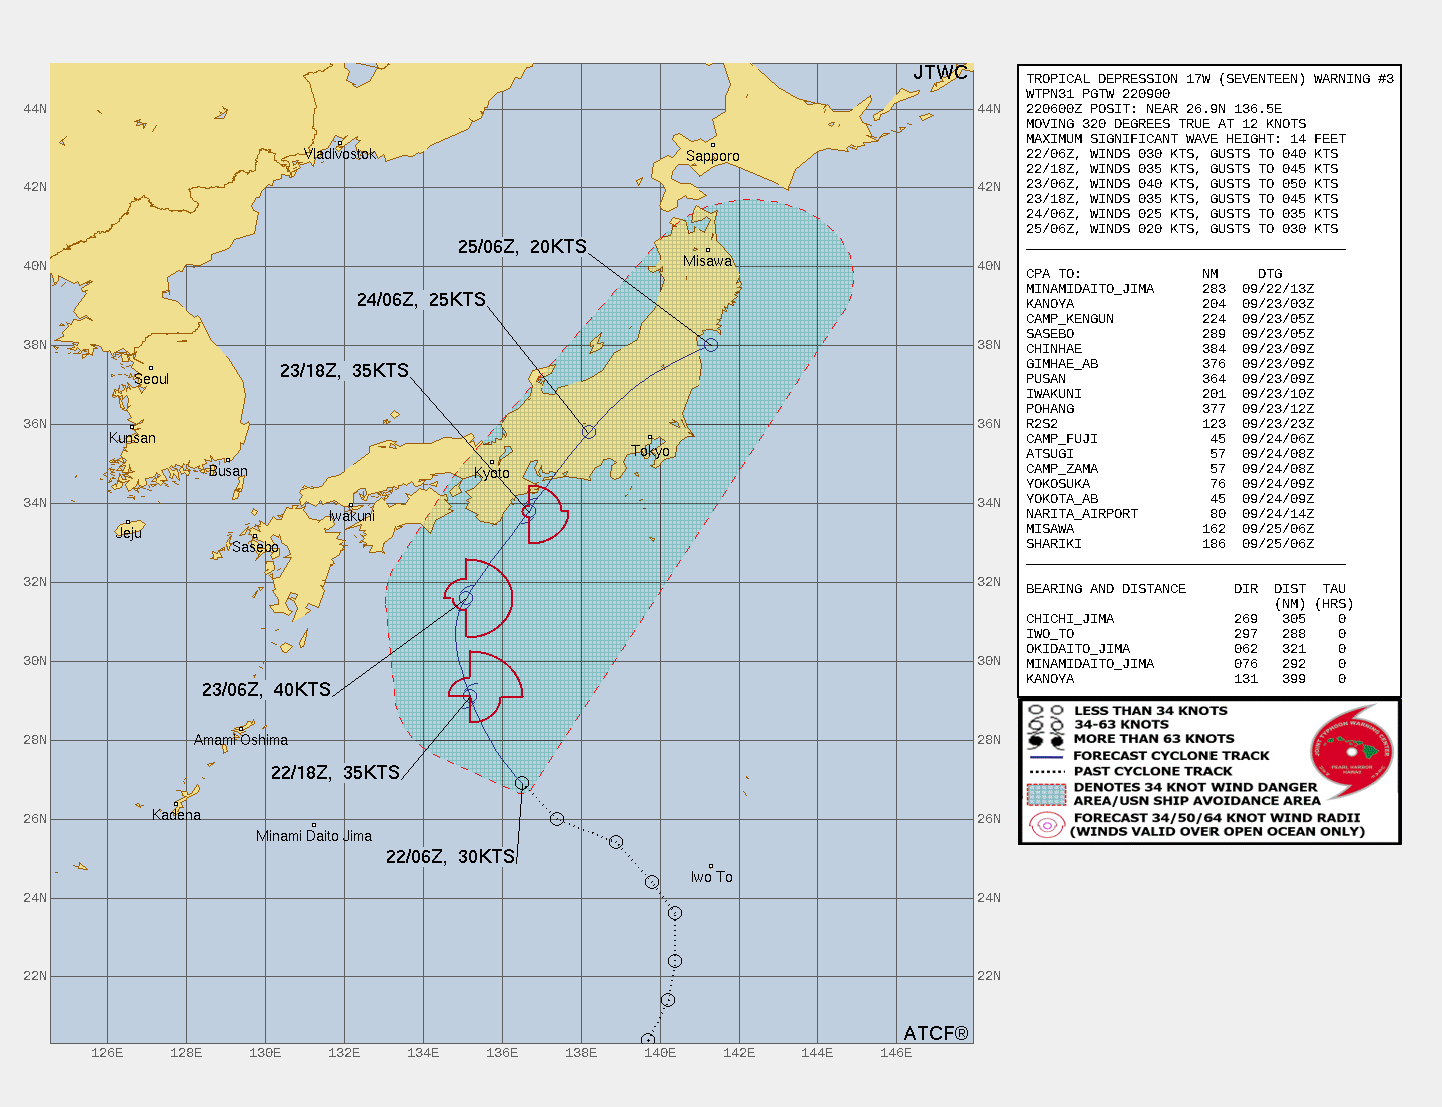 FORECAST REASONING.  SIGNIFICANT FORECAST CHANGES: THERE ARE NO SIGNIFICANT CHANGES TO THE FORECAST FROM THE PREVIOUS WARNING.  FORECAST DISCUSSION: ENVIRONMENTAL CONDITIONS REMAIN MARGINALLY FAVORABLE AS CHARACTERIZED BY WARM SEA SURFACE TEMPERATURES (SSTS) (28-29C), AND STRONG POLEWARD OUTFLOW INDUCED BY AN UPPER LEVEL TROUGH, SITUATED TO THE NORTHWEST OF 17W. AS TD 17W TRACKS POLEWARD ALONG THE WESTERN PERIPHERY OF A DEEP-LAYER SUBTROPICAL RIDGE (STR), TD 17W WILL BEGIN TO ROUND THE RIDGE AXIS BETWEEN TAUS 12 AND 24 AND INCREASE IN TRACK SPEED AND ONLY INCREASE INTENSITY TO A PEAK OF 40KTS AS AN APPROACHING UPPER-LEVEL TROUGH MOVES IN FROM THE WEST. AS THE SYSTEM NEARS THE COAST OF JAPAN, IT WILL BEGIN TO ENCOUNTER STRONGER LOW-LEVEL SHEAR JUST BEFORE MAKING LANDFALL ON MAINLAND HONSHU, NEAR THE CITY OF TAHARA, AICHI PREFECTURE, JAPAN JUST AFTER TAU 36. TD 17W WILL CONTINUE ON A NORTHEAST TRACK OVER LAND AND ENCOUNTER THE RUGGED TERRAIN, WHEREBY IT WILL QUICKLY DECREASE IN INTENSITY AND LIKELY DISSIPATE BETWEEN TAU 48 AND TAU 72 OVER LAND, HOWEVER, A SLIGHT CHANCE REMAINS FOR THE SYSTEM TO DISSIPATE OVER WATER.